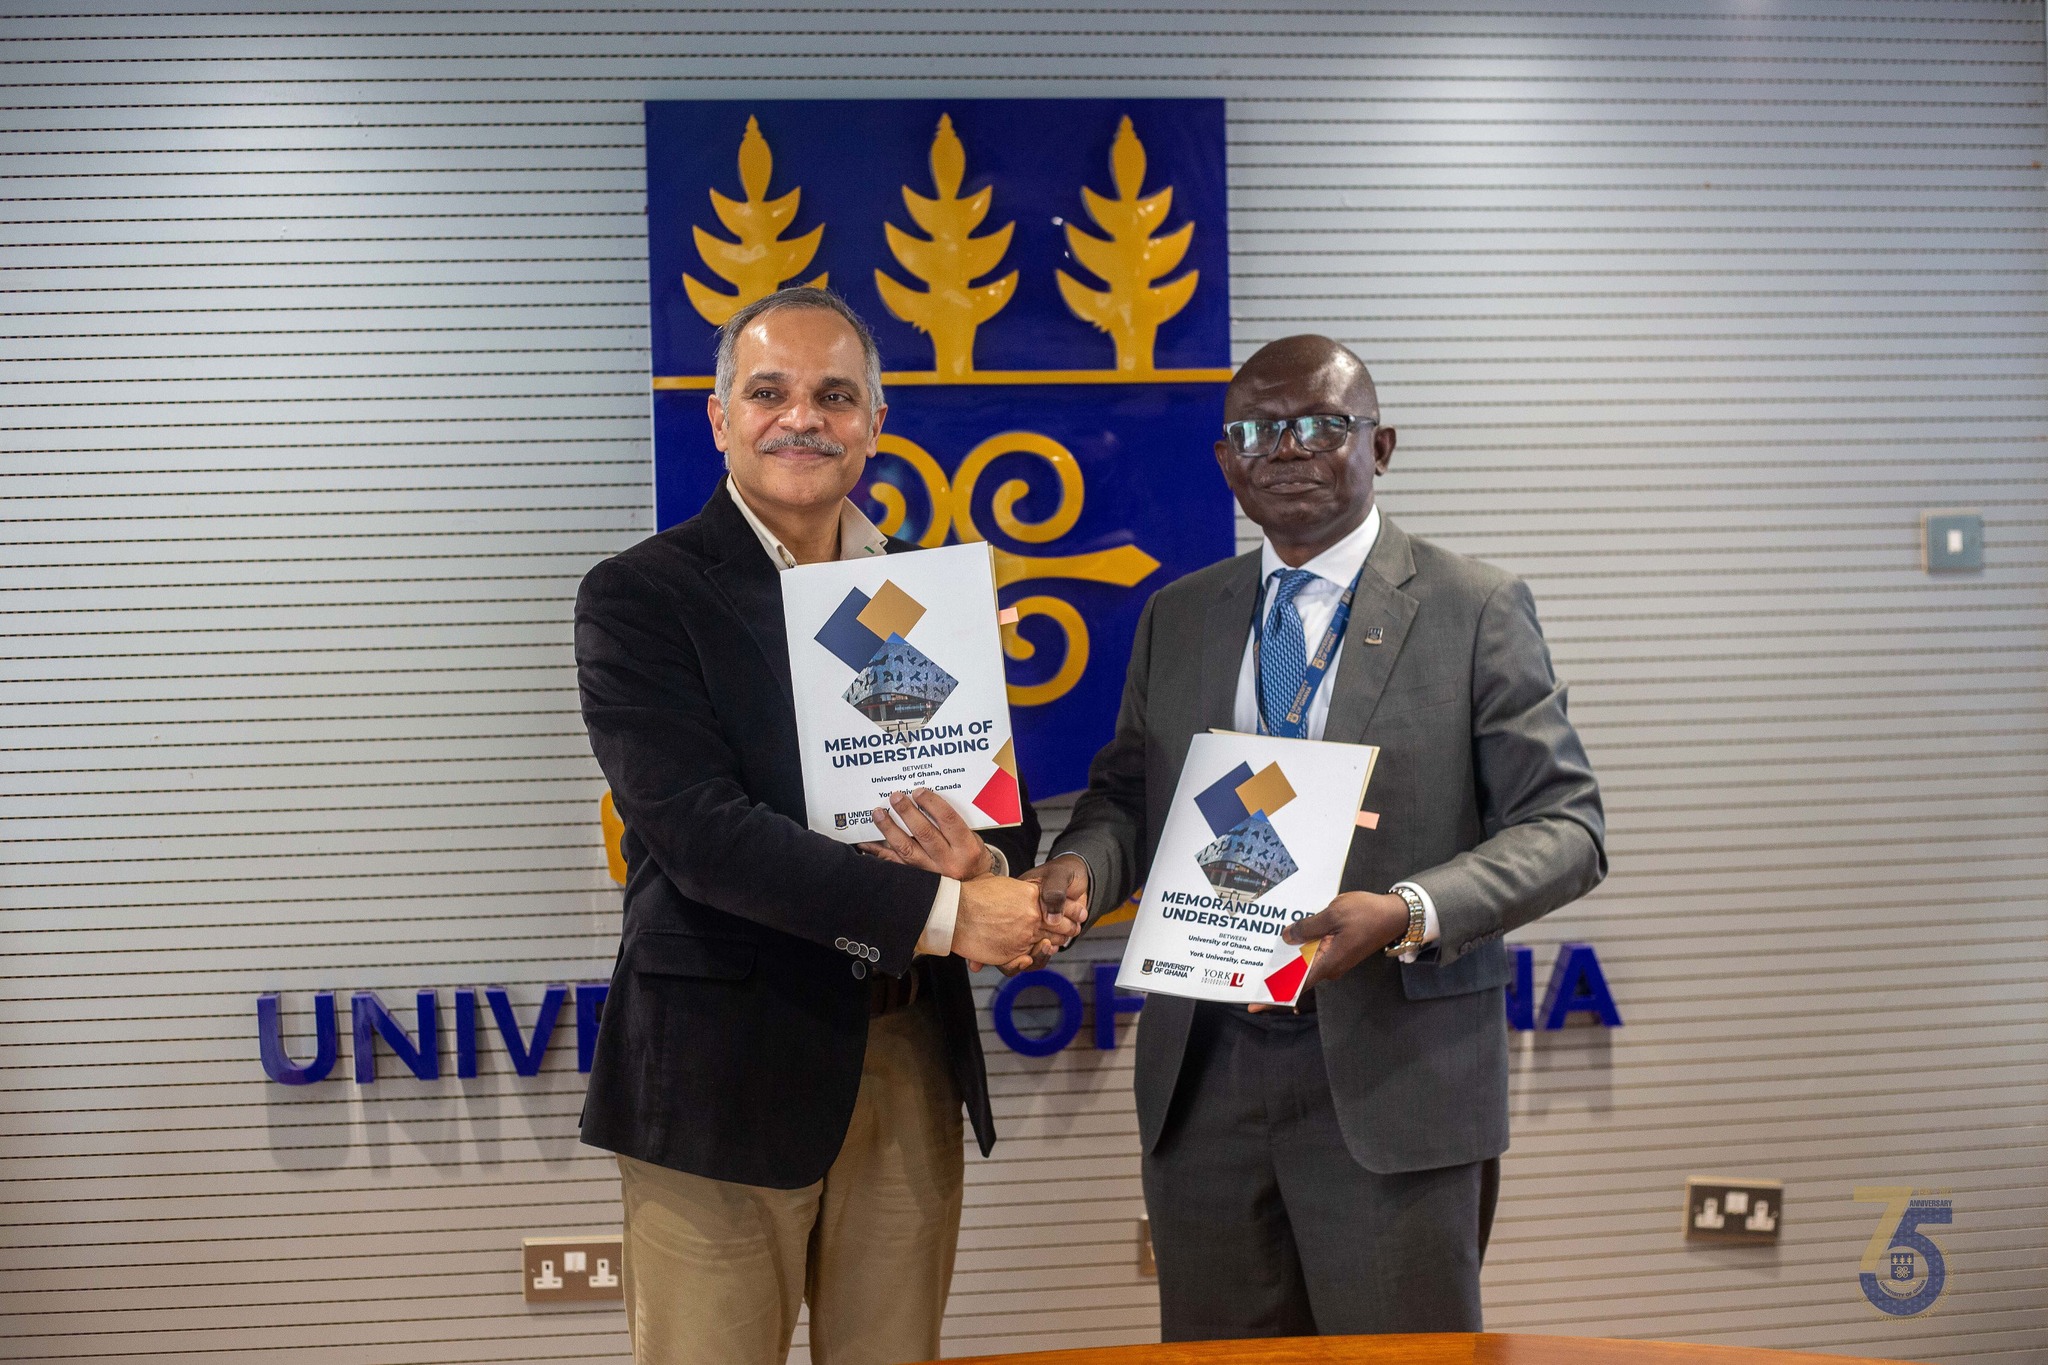 UG and York University Sign MoU to Partner on Cooperative Research